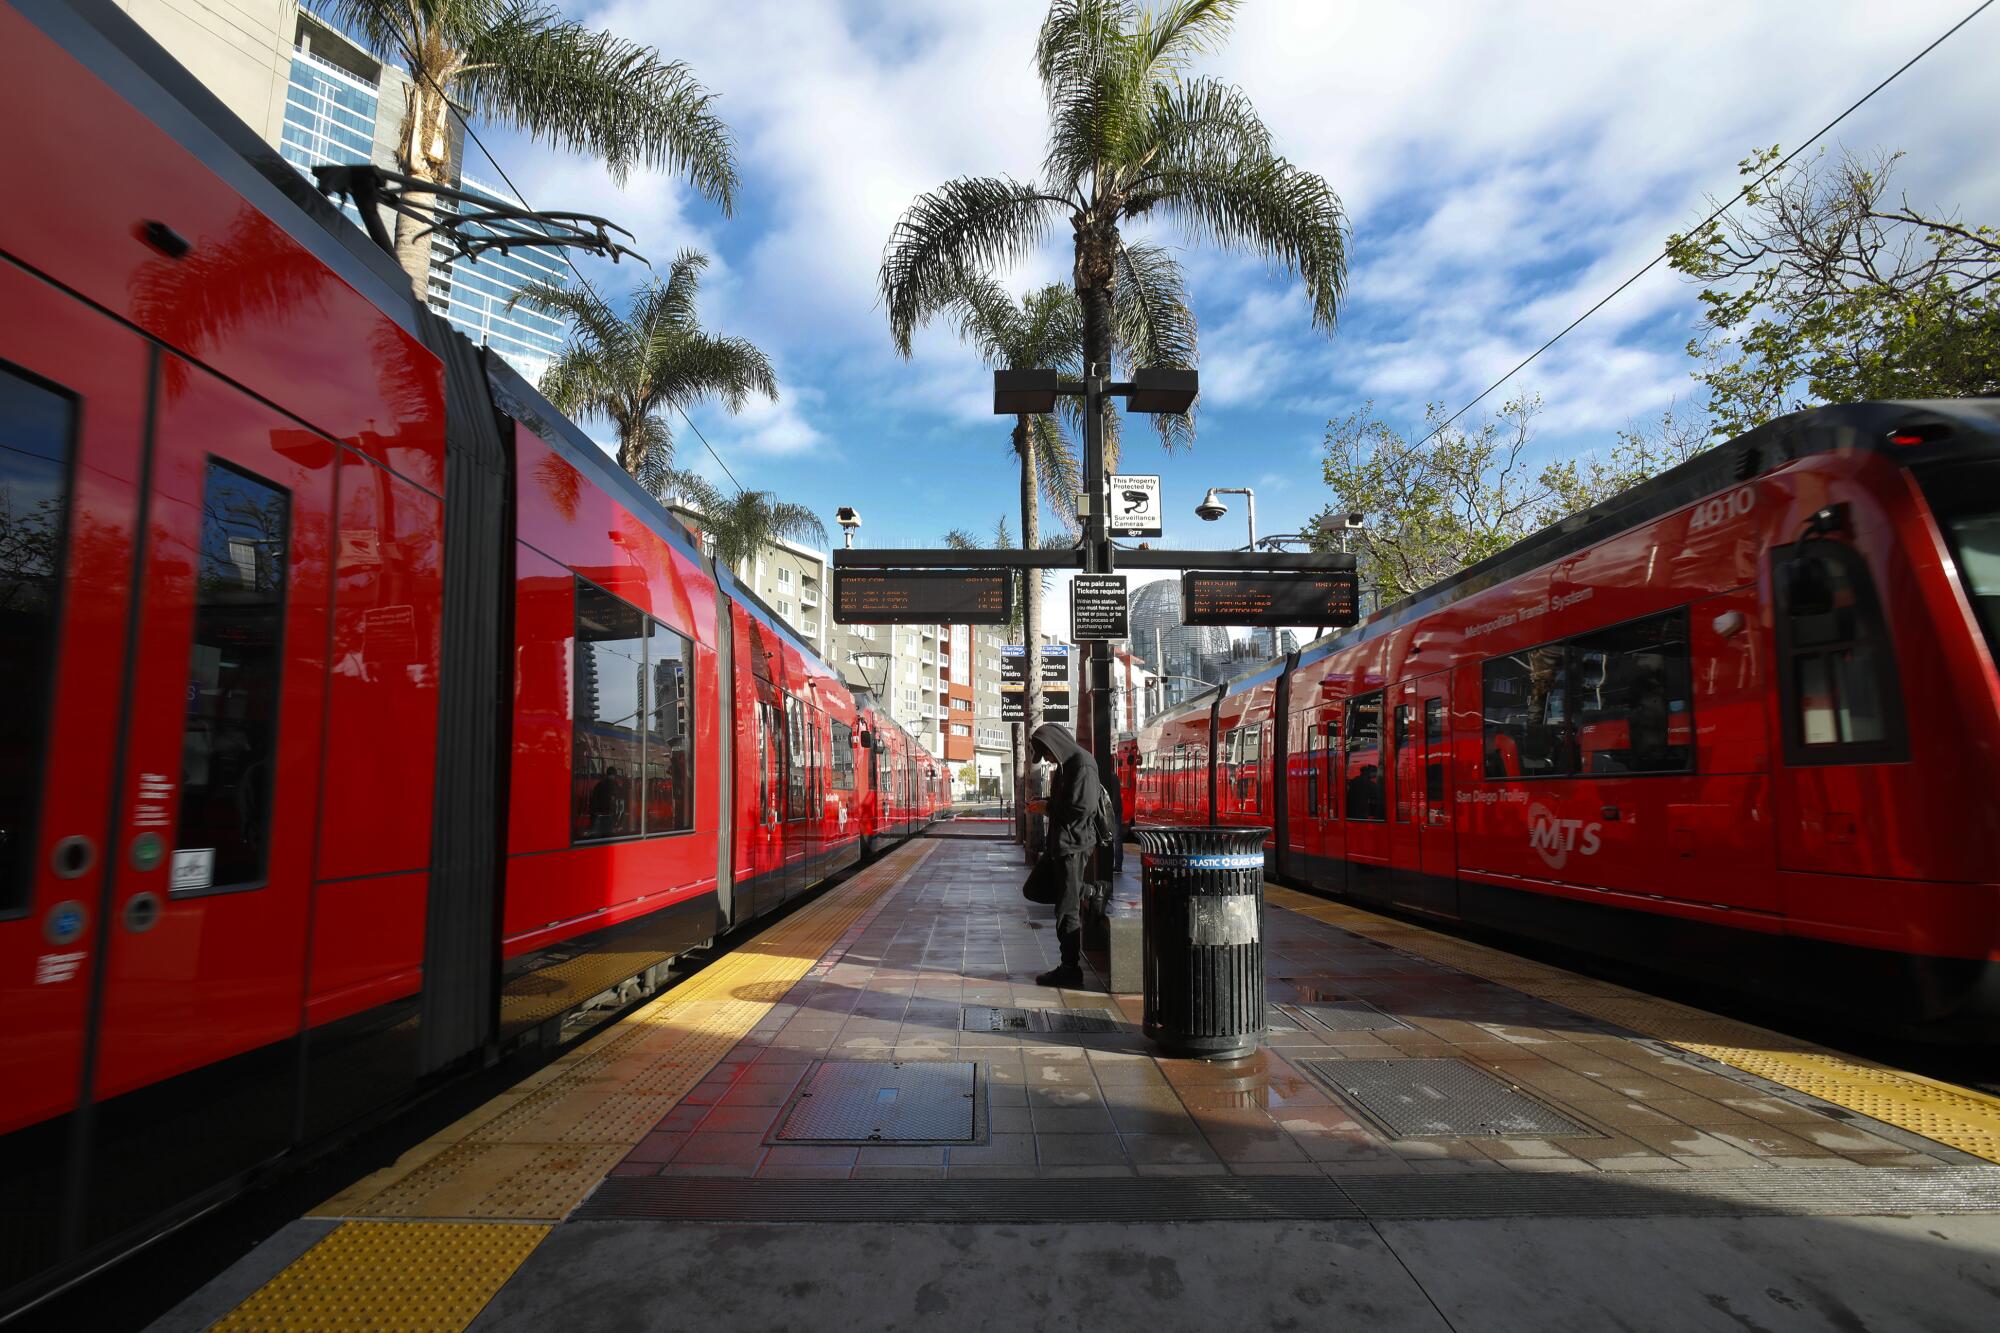 On Wednesday April 8, 2020, two almost empty trolley trains arrived and departed from the 12th and Imperial Transit Center in downtown, San Diego.